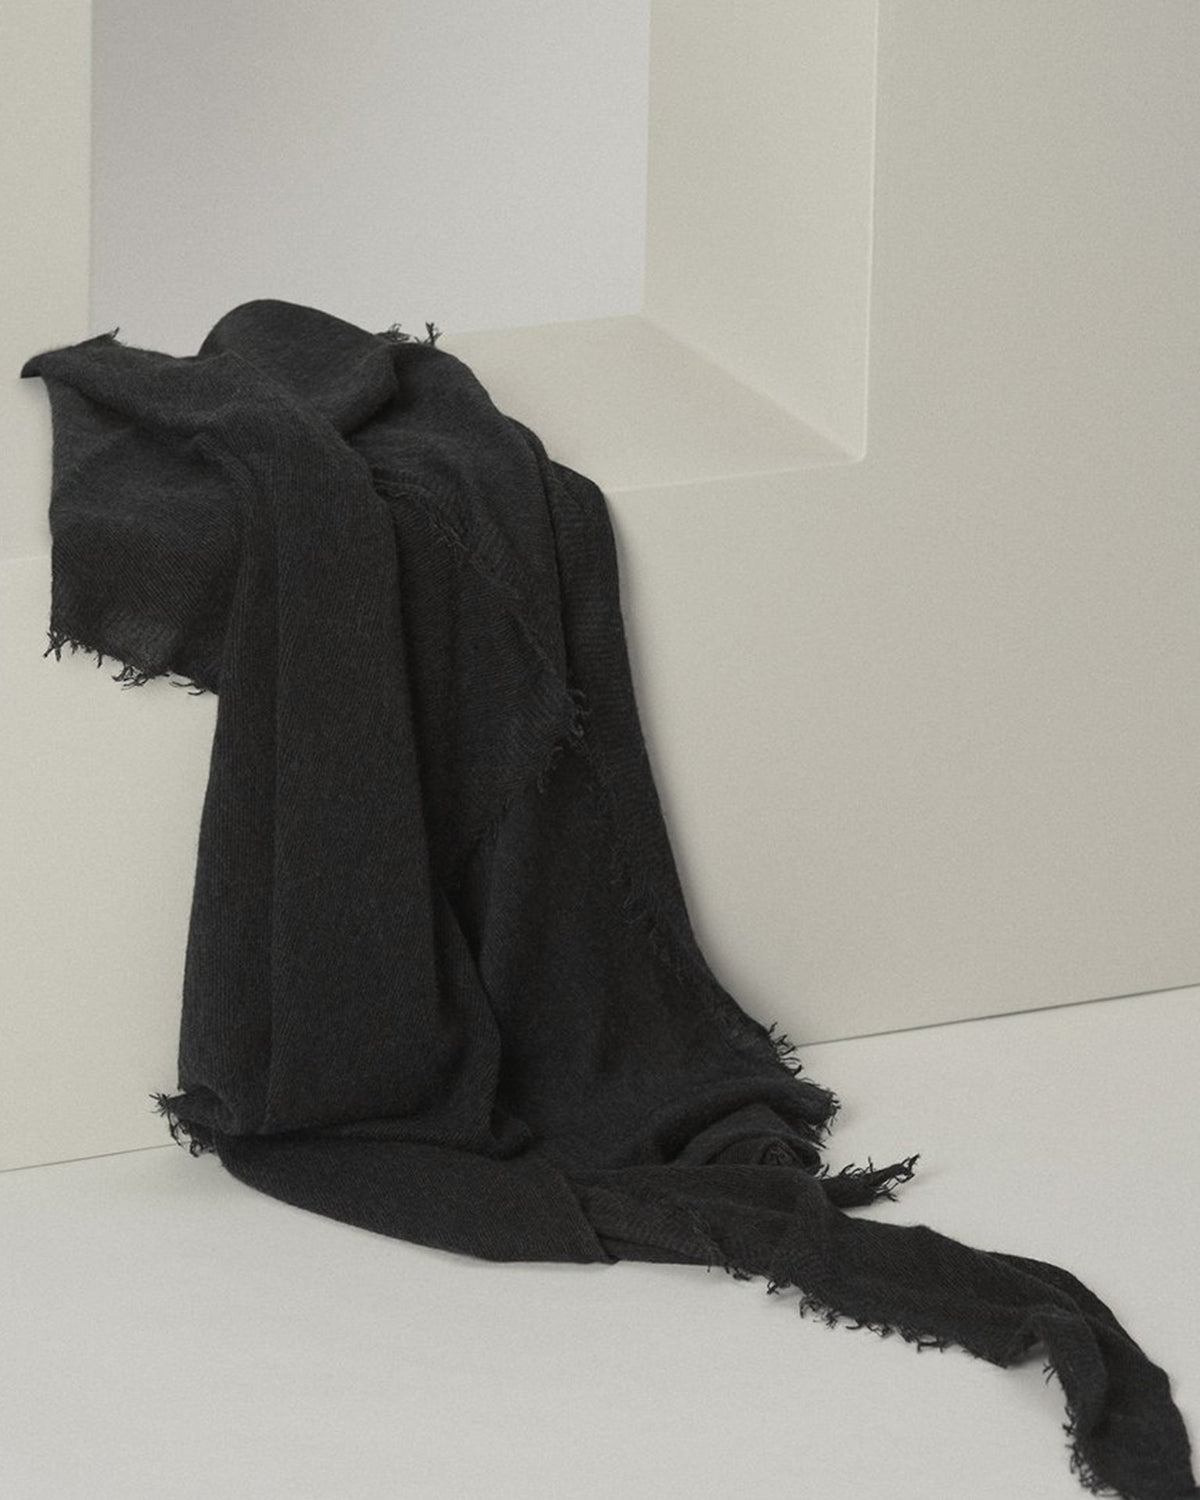 Grisal Accessories Black X Charcoal Love Cashmere Scarf in Black X Charcoal